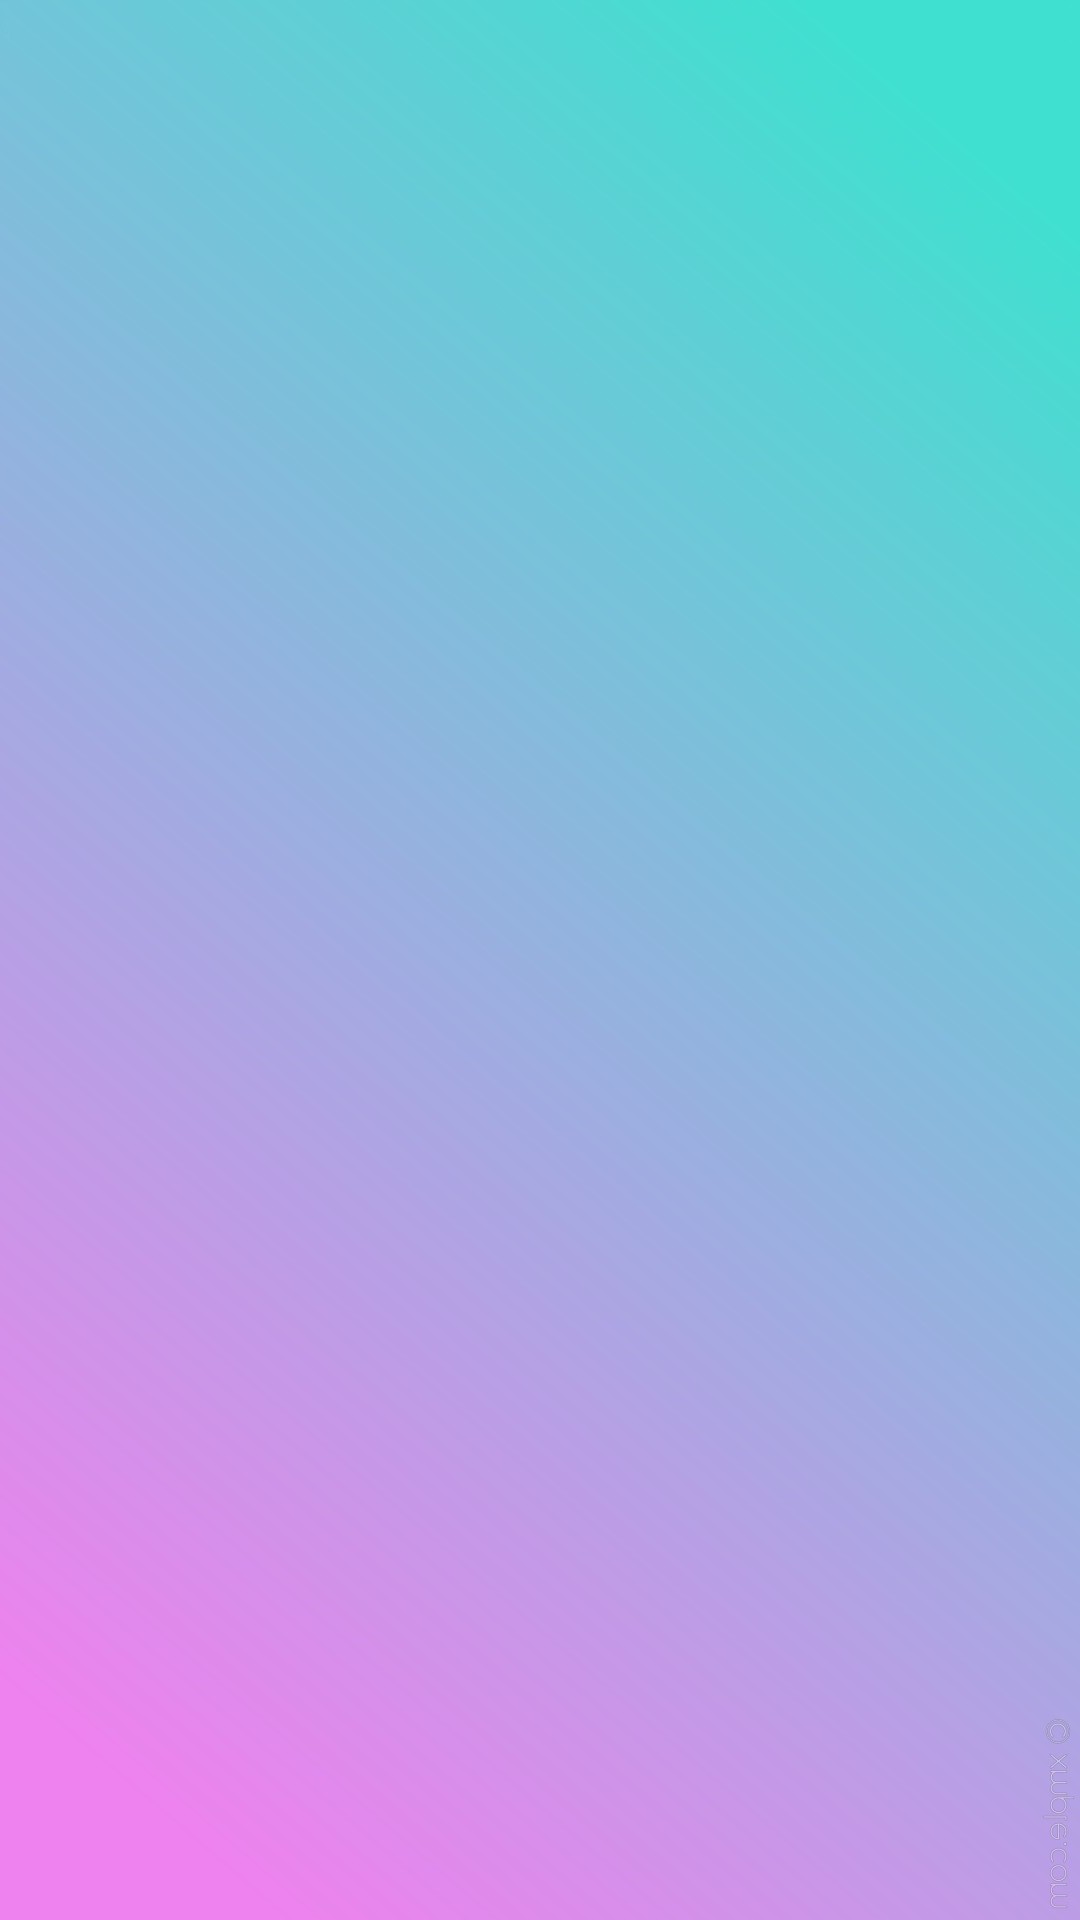 Android Wallpaper HD Gradient With high-resolution 1080X1920 pixel. You can use this wallpaper for your Android backgrounds, Tablet, Samsung Screensavers, Mobile Phone Lock Screen and another Smartphones device